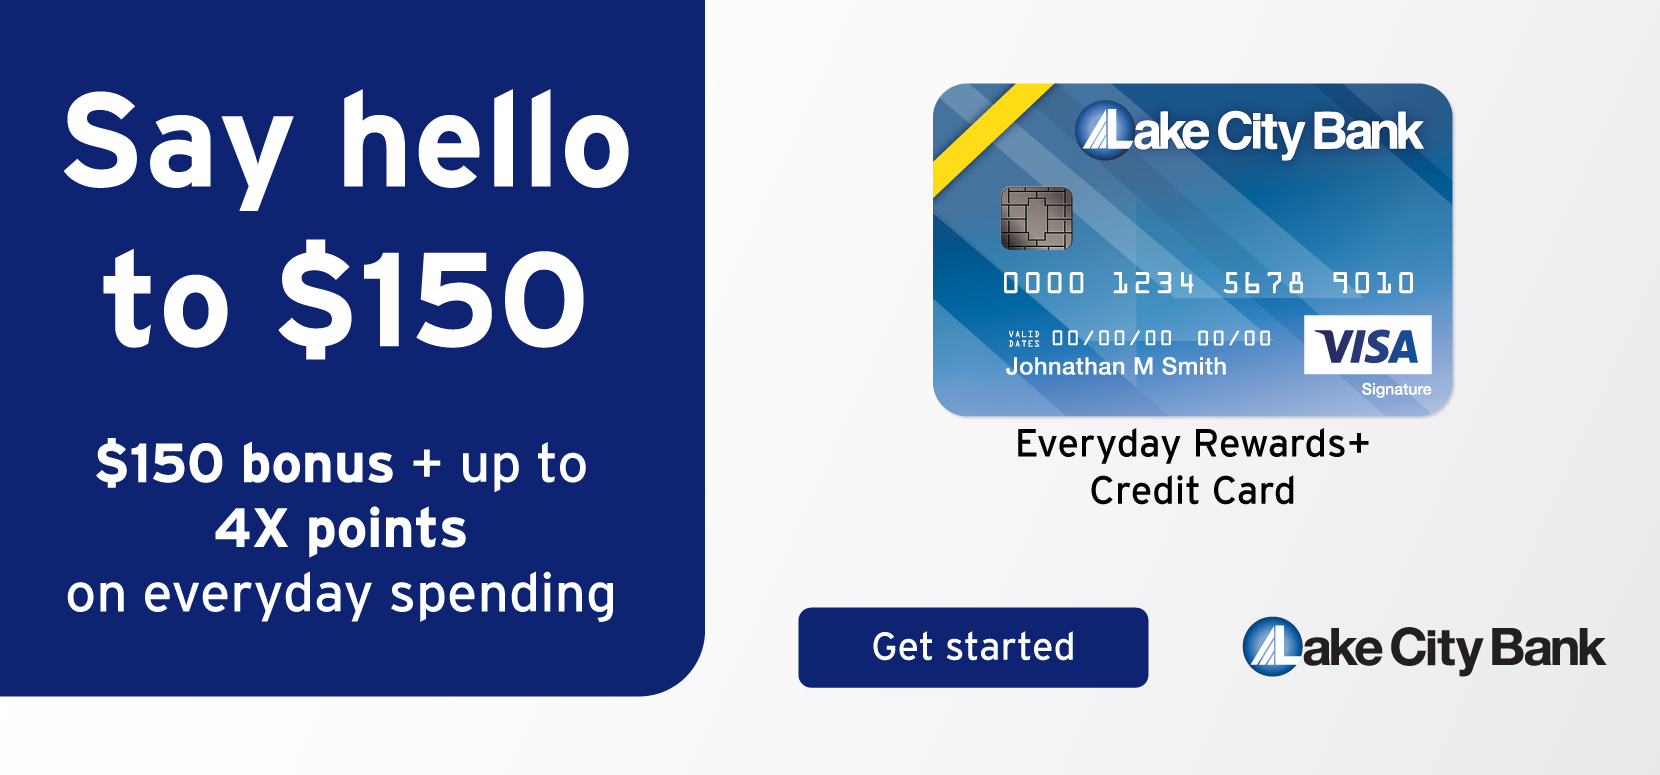 $150 bonus plus up to 4X point on everyday spending. Credit Card ad.